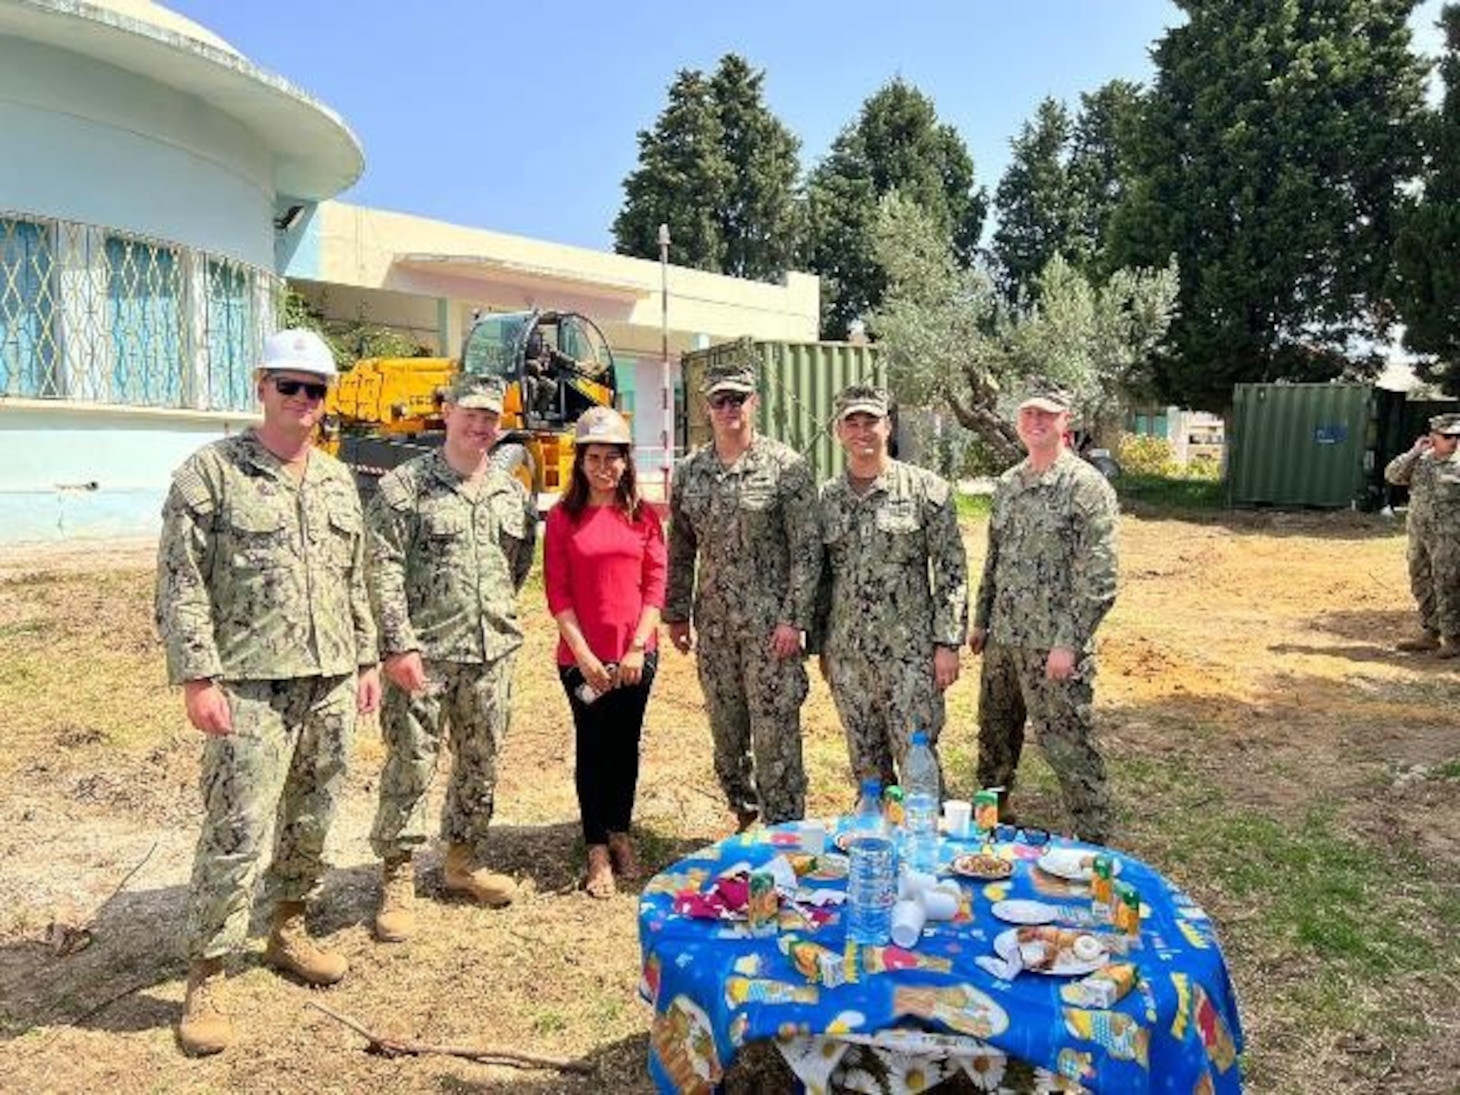 (June 7, 2022) U.S. Navy Seabees assigned to Naval Mobile Construction Battalion 133 pose for a photo with a teacher Reem Glai Hassen at ground breaking ceremony to begin the construction of a new 130 square meter, two-room kindergarten building with a bathroom at the local elementary school in Bizerte, Tunisia on June 7, 2022. Phoenix Express 22, conducted by U.S. Naval Forces Africa, is a maritime exercise designed to improve cooperation among participating nations in order to increase maritime safety and security in the Mediterranean.